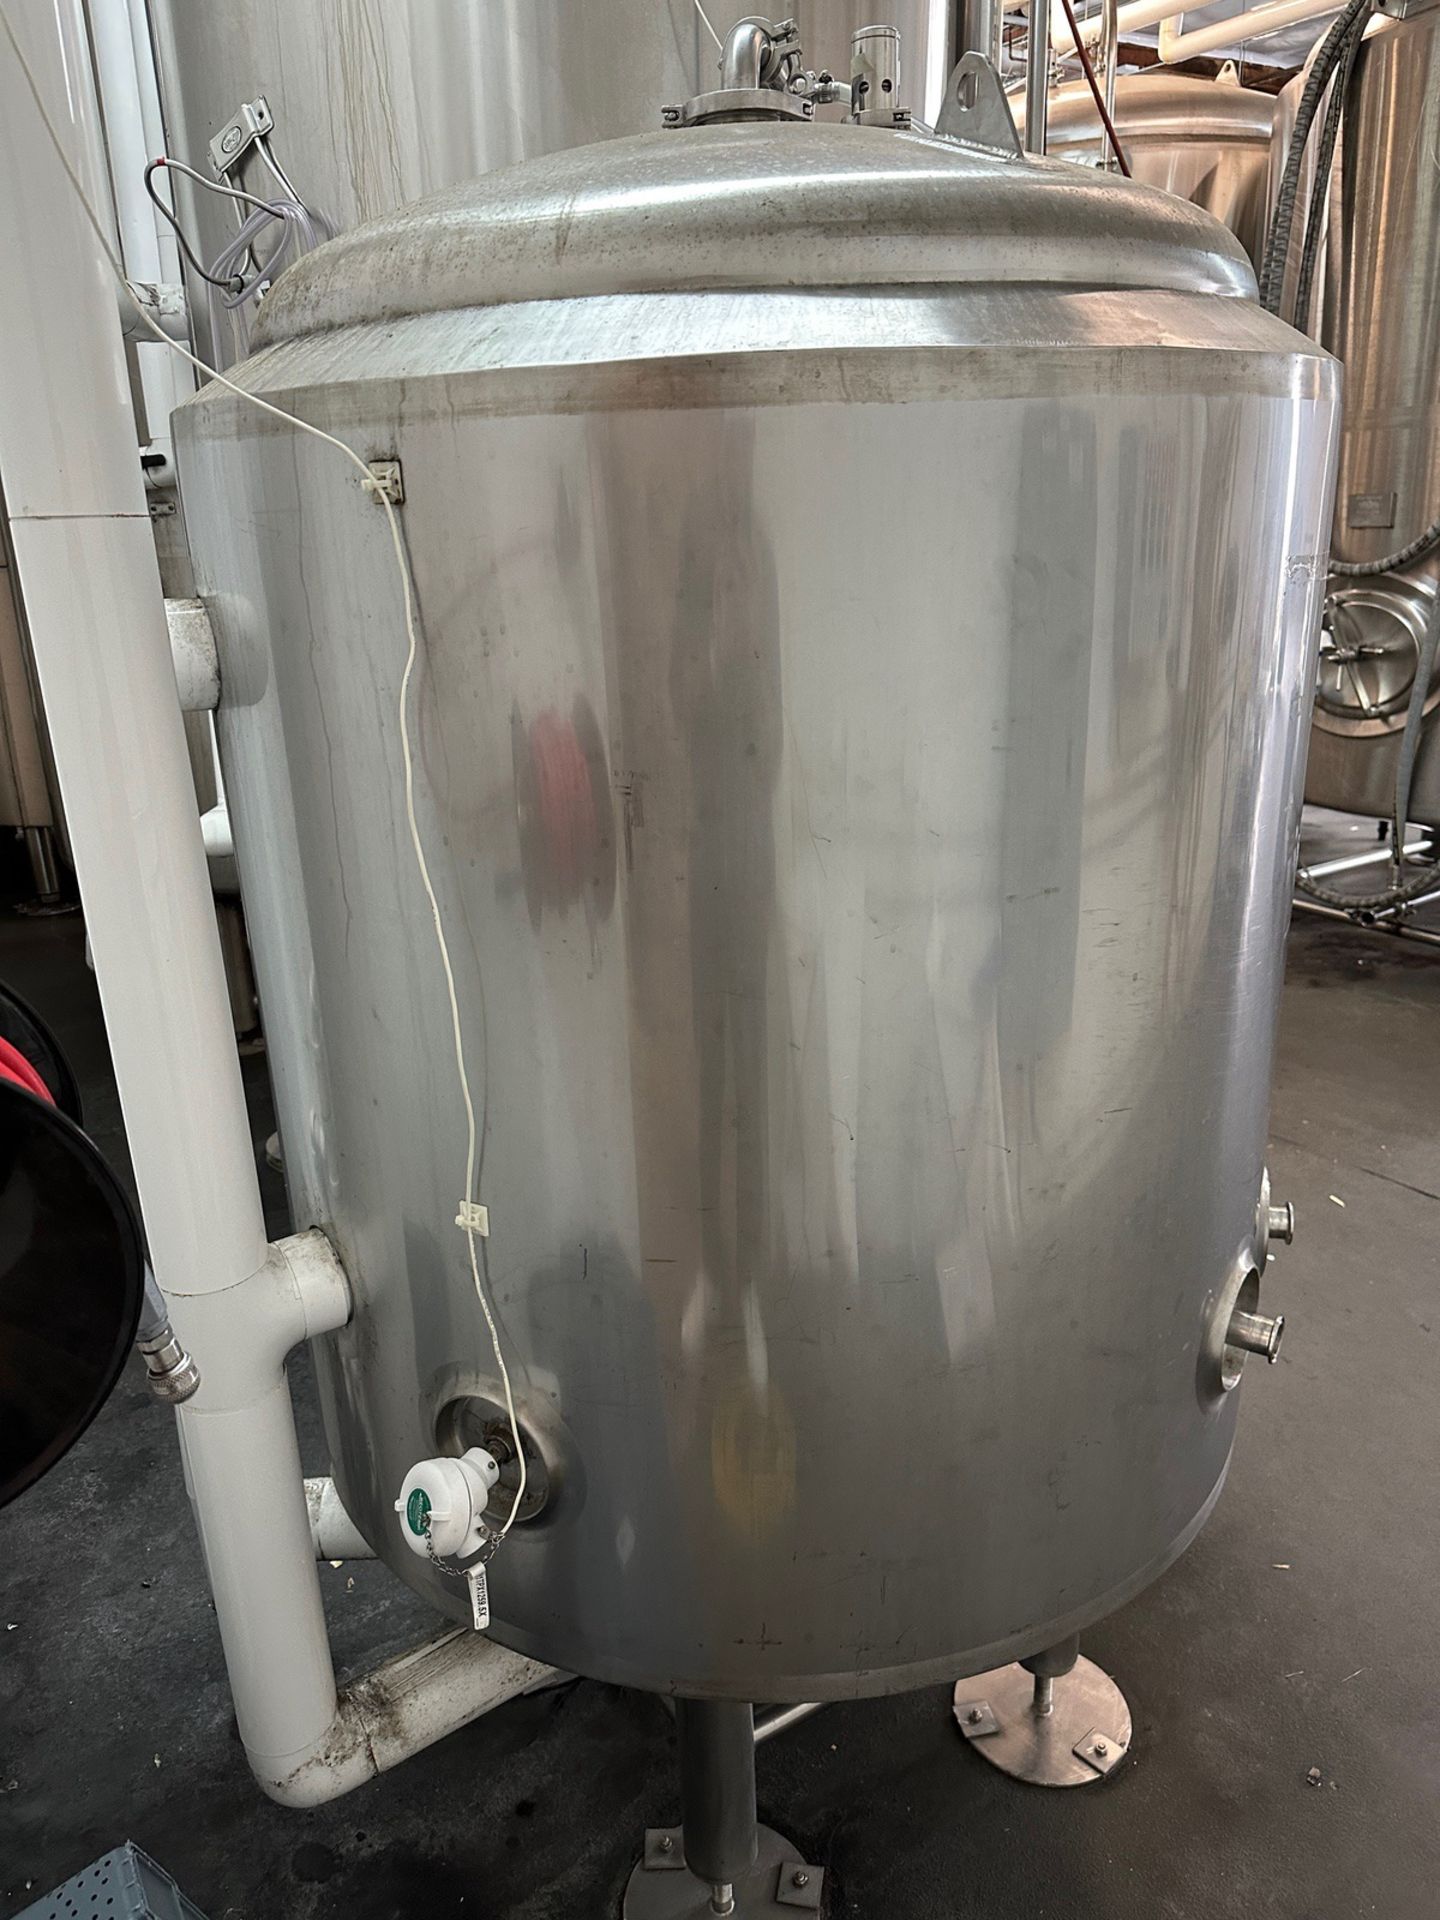 8 BBL Pacific Brew Systems Stainless Steel Brite Tank - Dish Bottom, Glycol Jackete | Rig Fee $450 - Image 2 of 2